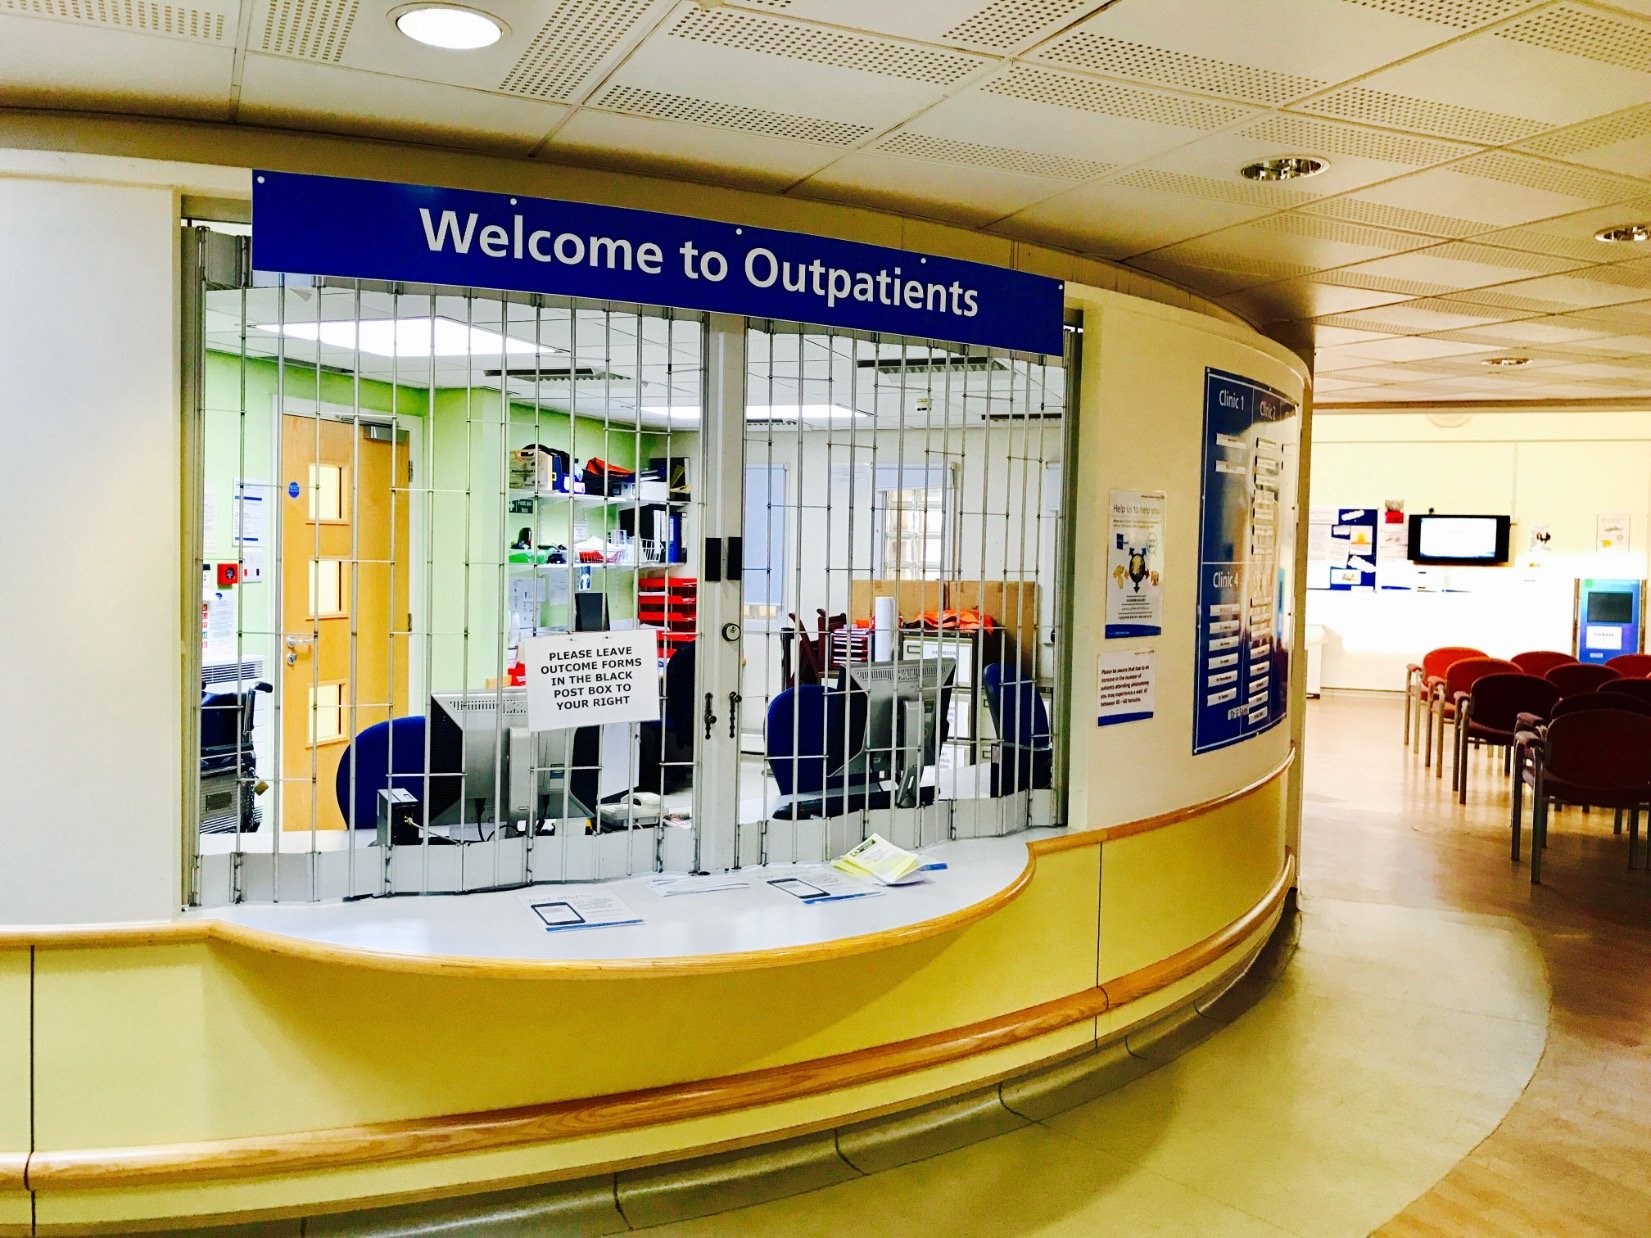 The official account for the Main Outpatients Department at Nottingham University Hospitals.